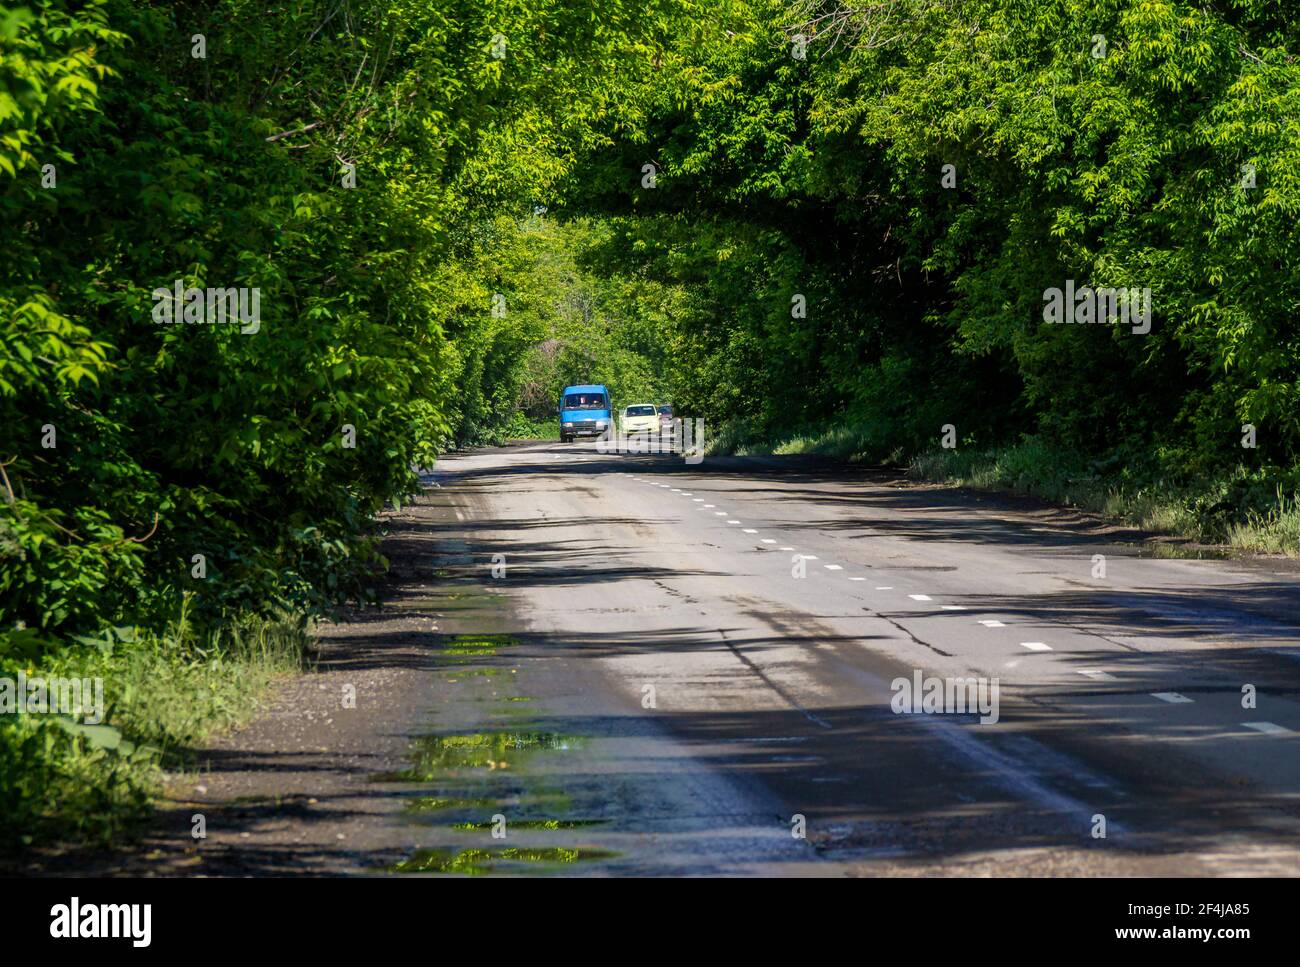 after rain, a wet curved asphalt road passes through the forest forming green arches from the branches through which cars travel Stock Photo